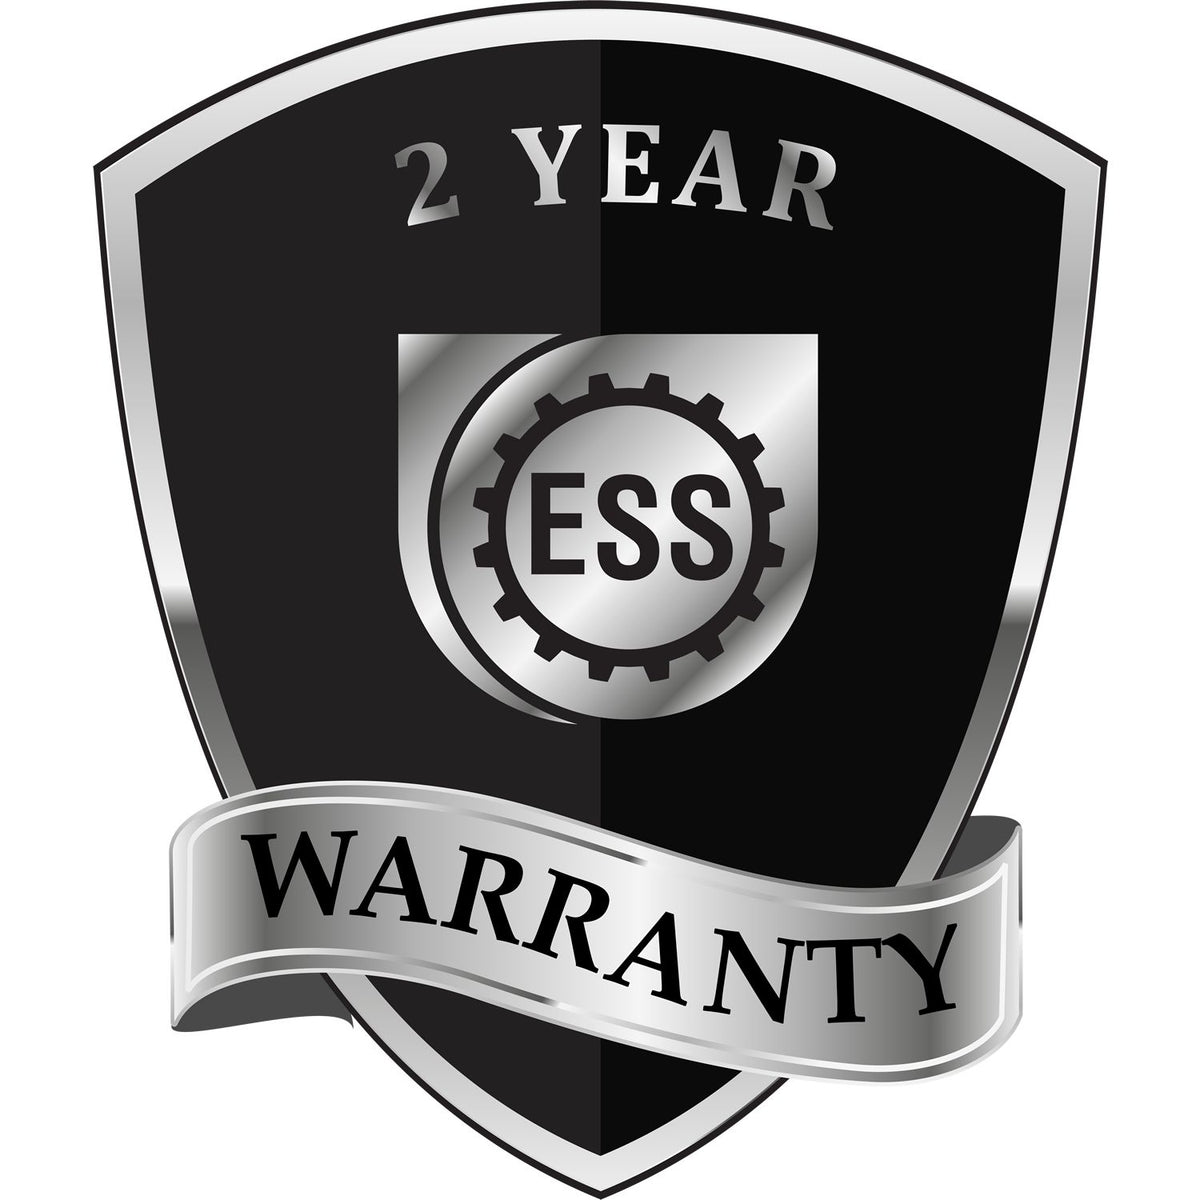 A black and silver badge or emblem showing warranty information for the Gift New Jersey Land Surveyor Seal